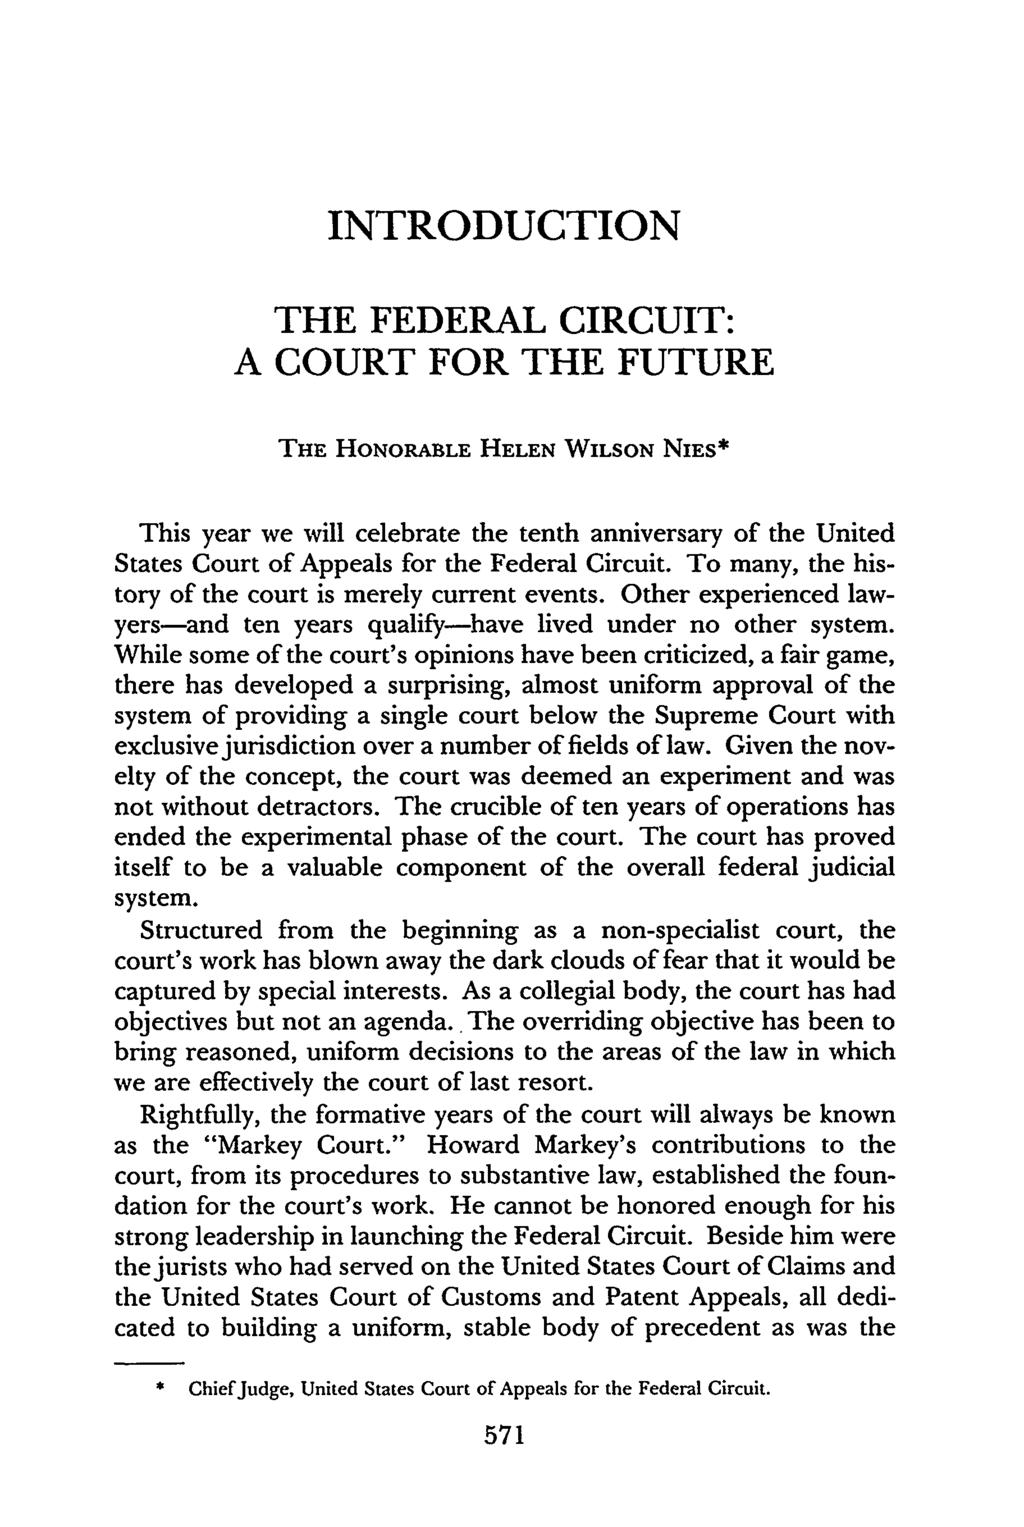 INTRODUCTION THE FEDERAL CIRCUIT: A COURT FOR THE FUTURE THE HONORABLE HELEN WILSON NIES* This year we will celebrate the tenth anniversary of the United States Court of Appeals for the Federal